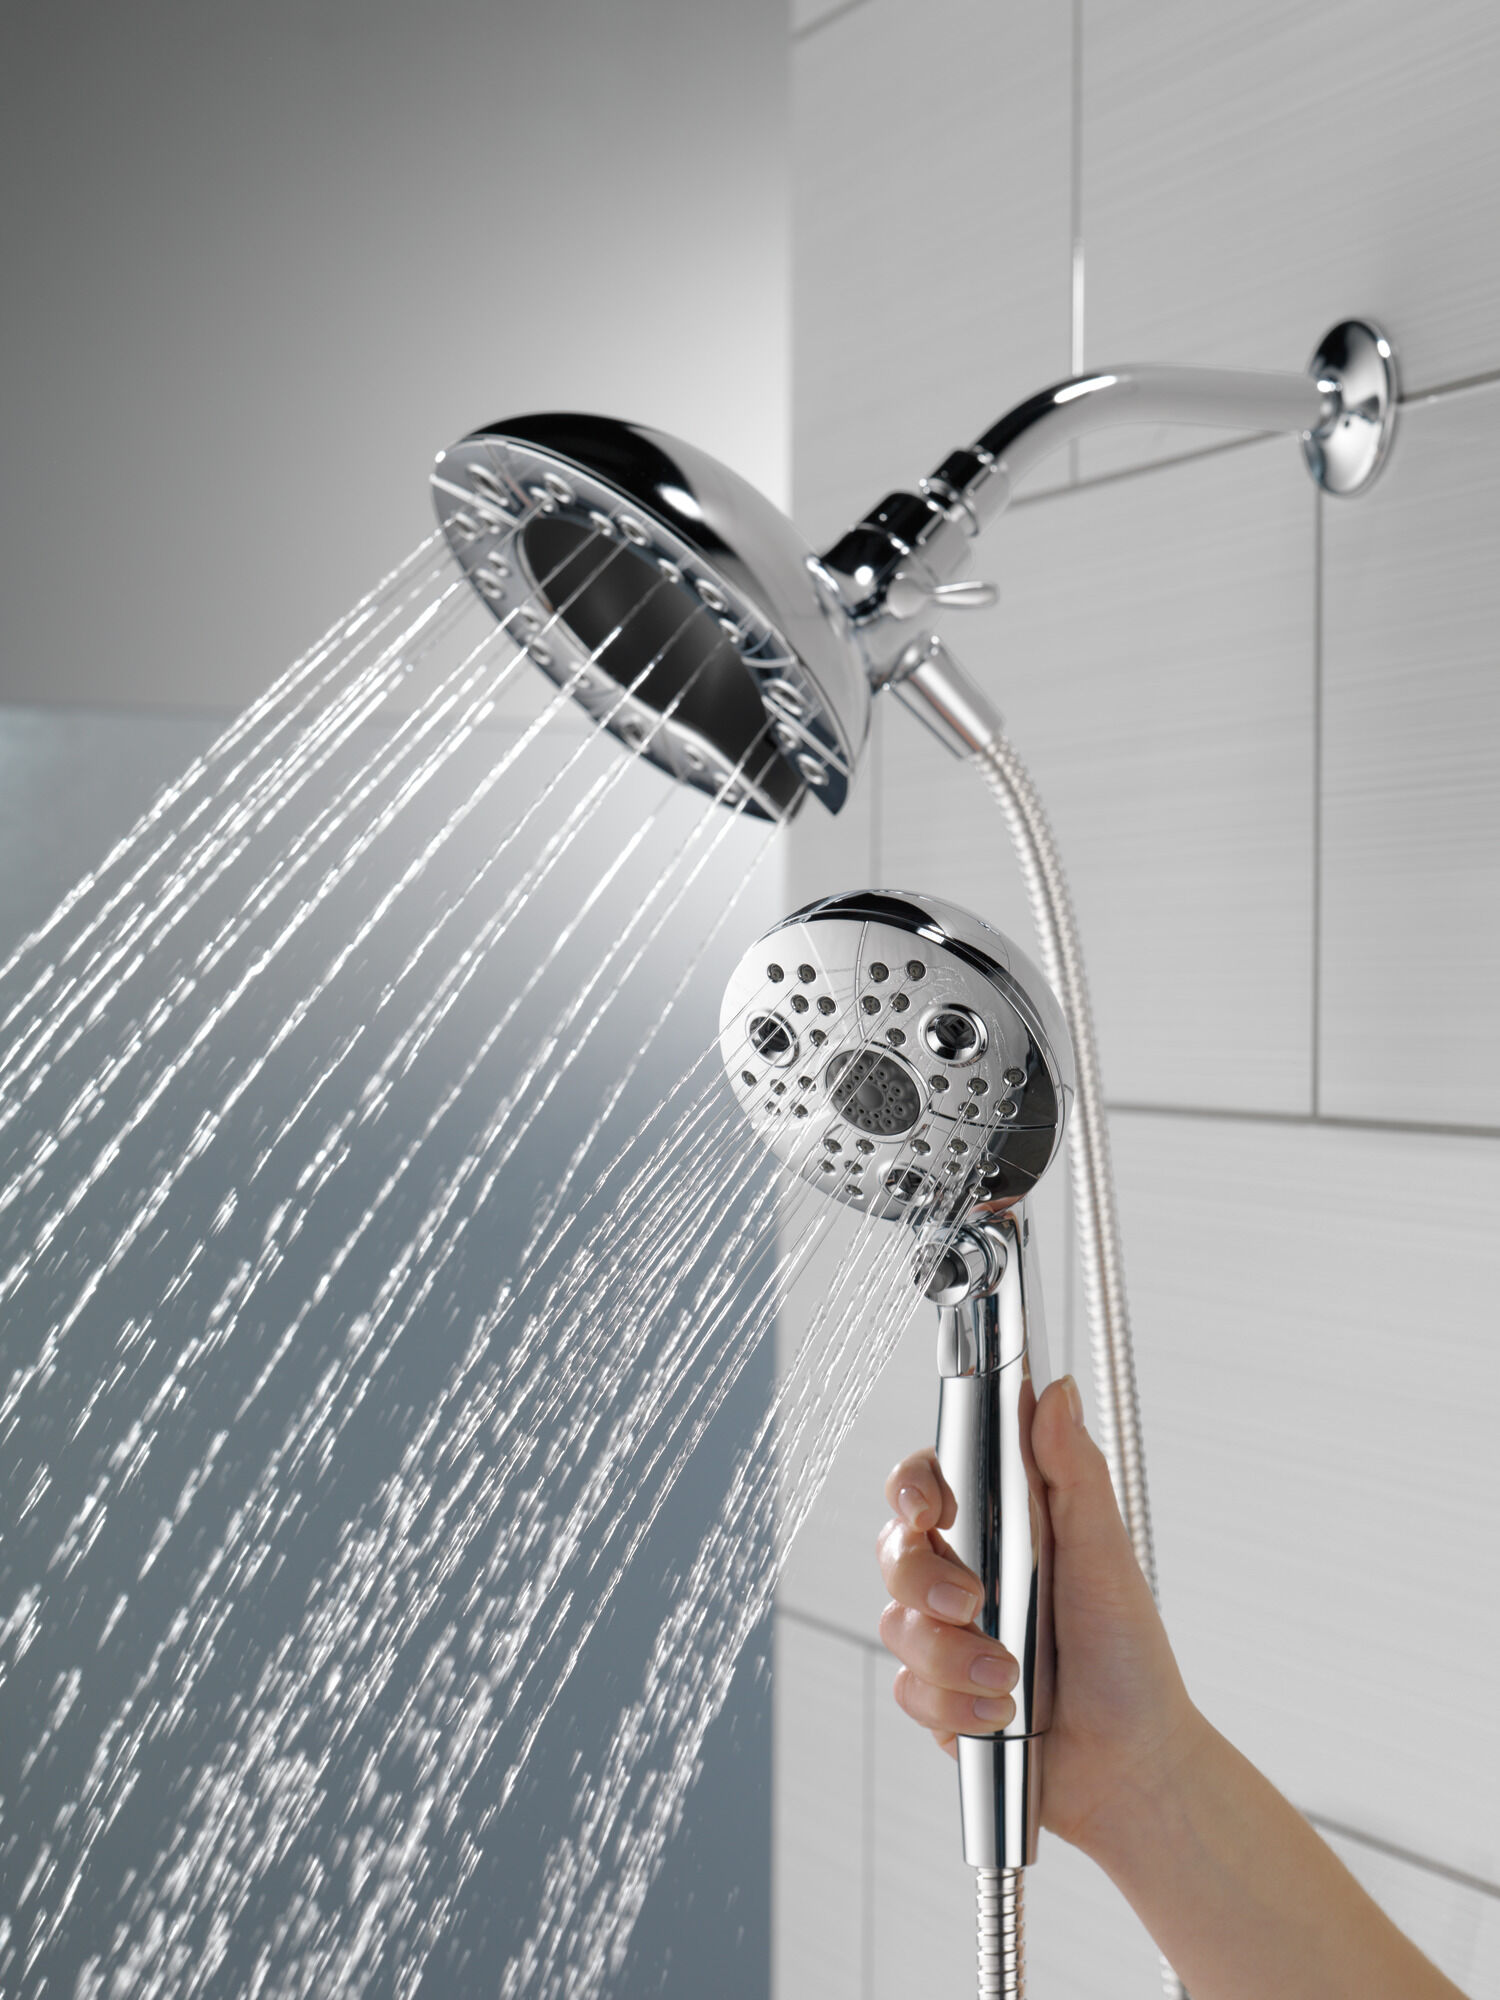 H2Okinetic® In2ition® 5-Setting Two-in-One Shower